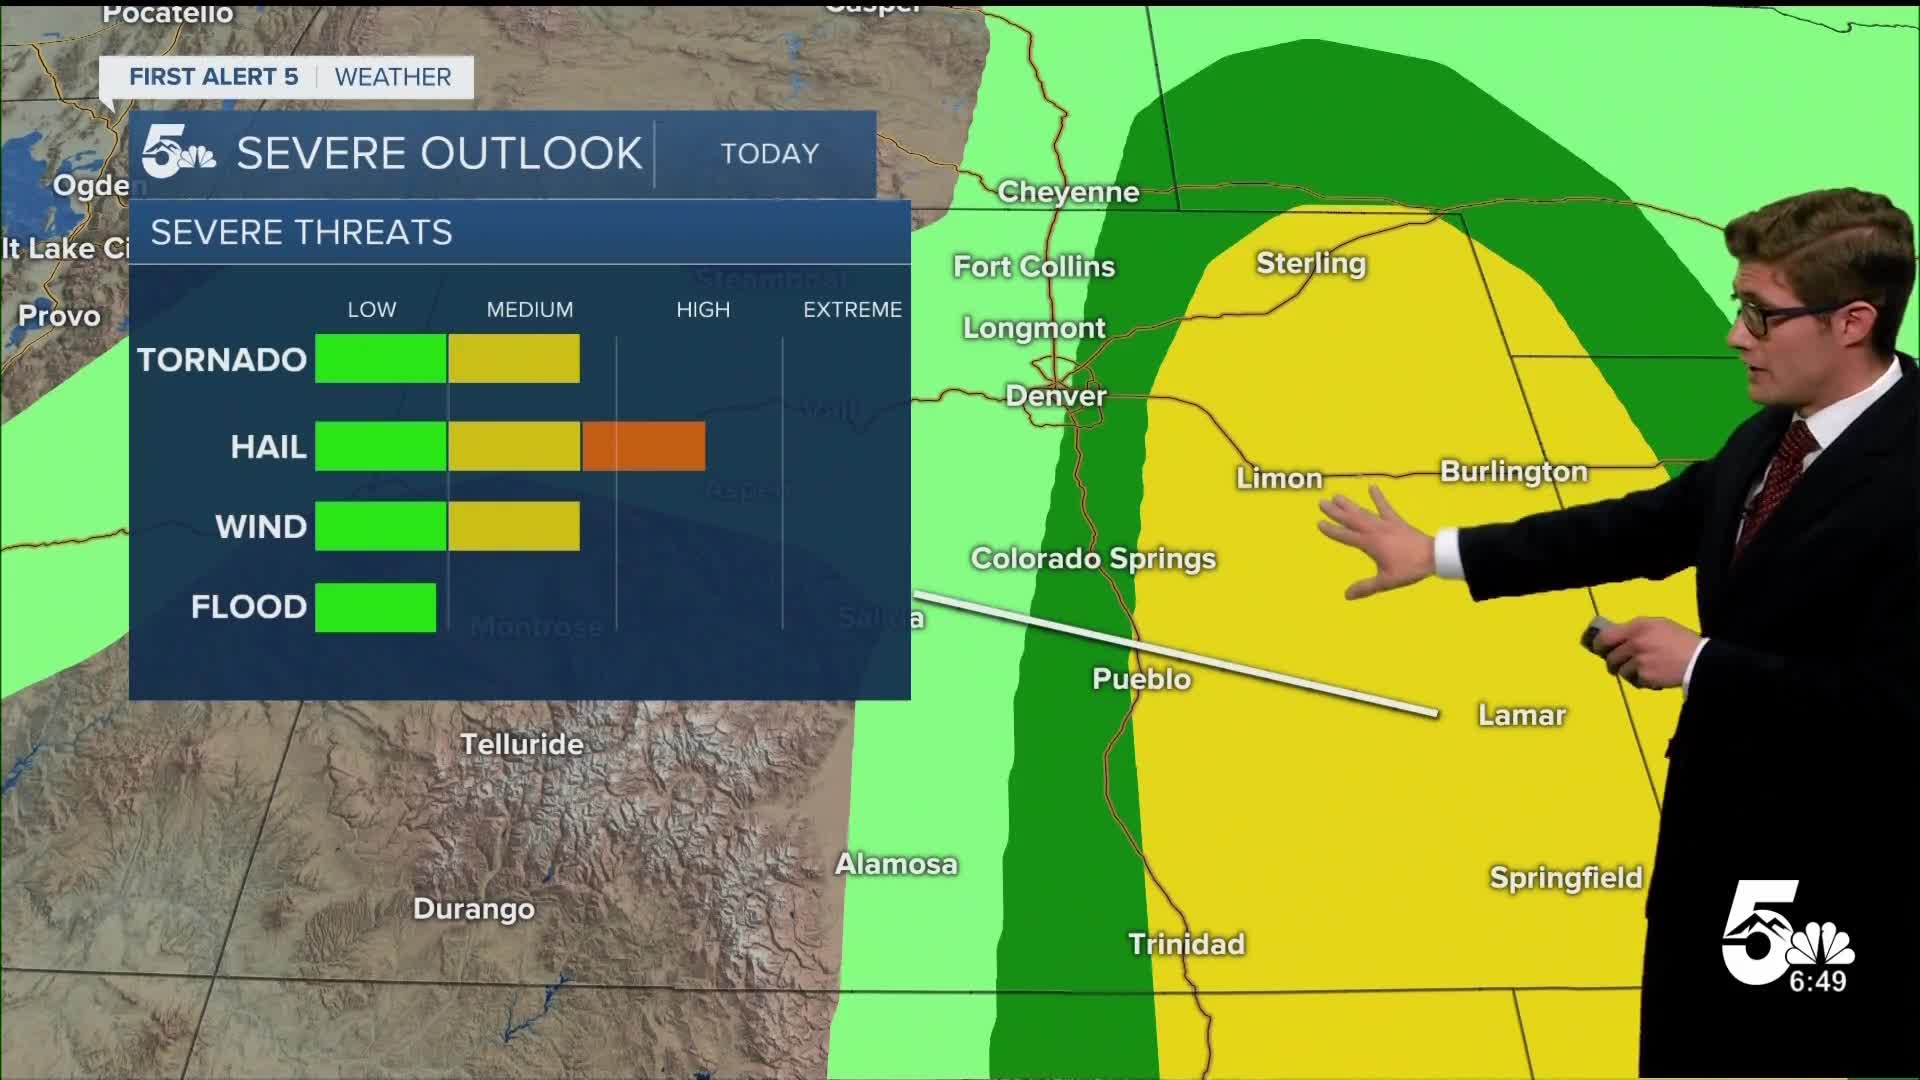 Strong thunderstorms possible this afternoon over parts of southern Colorado